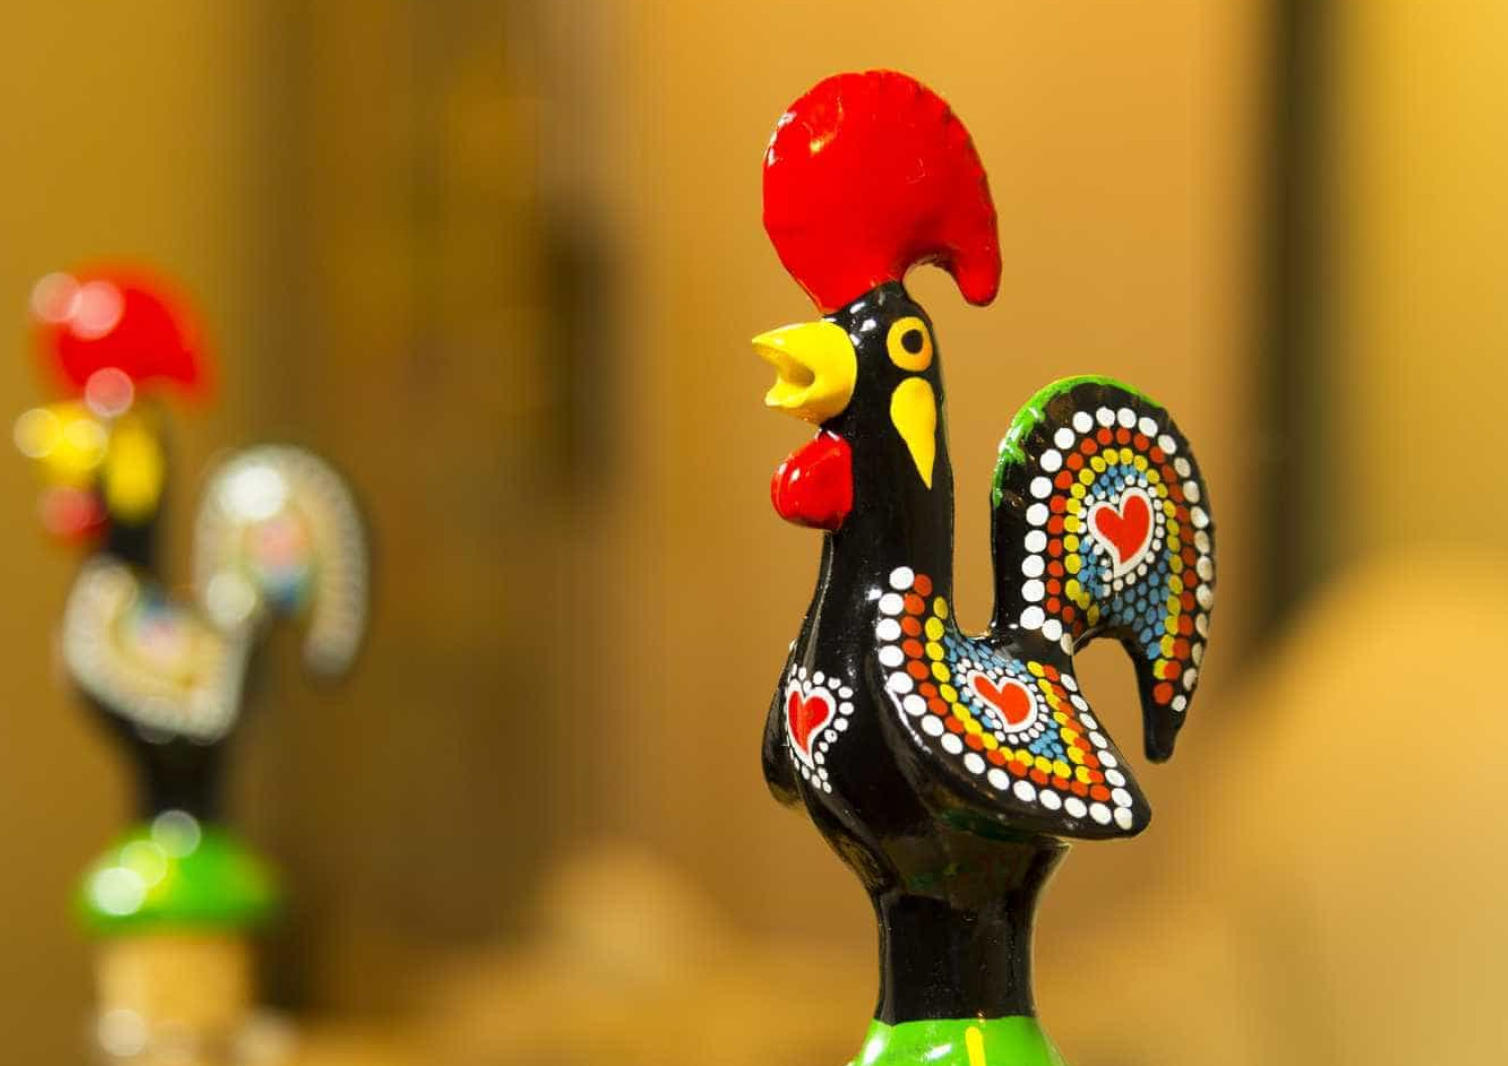 The Barcelos Rooster: A Symbol of Portuguese Tradition and Folklore